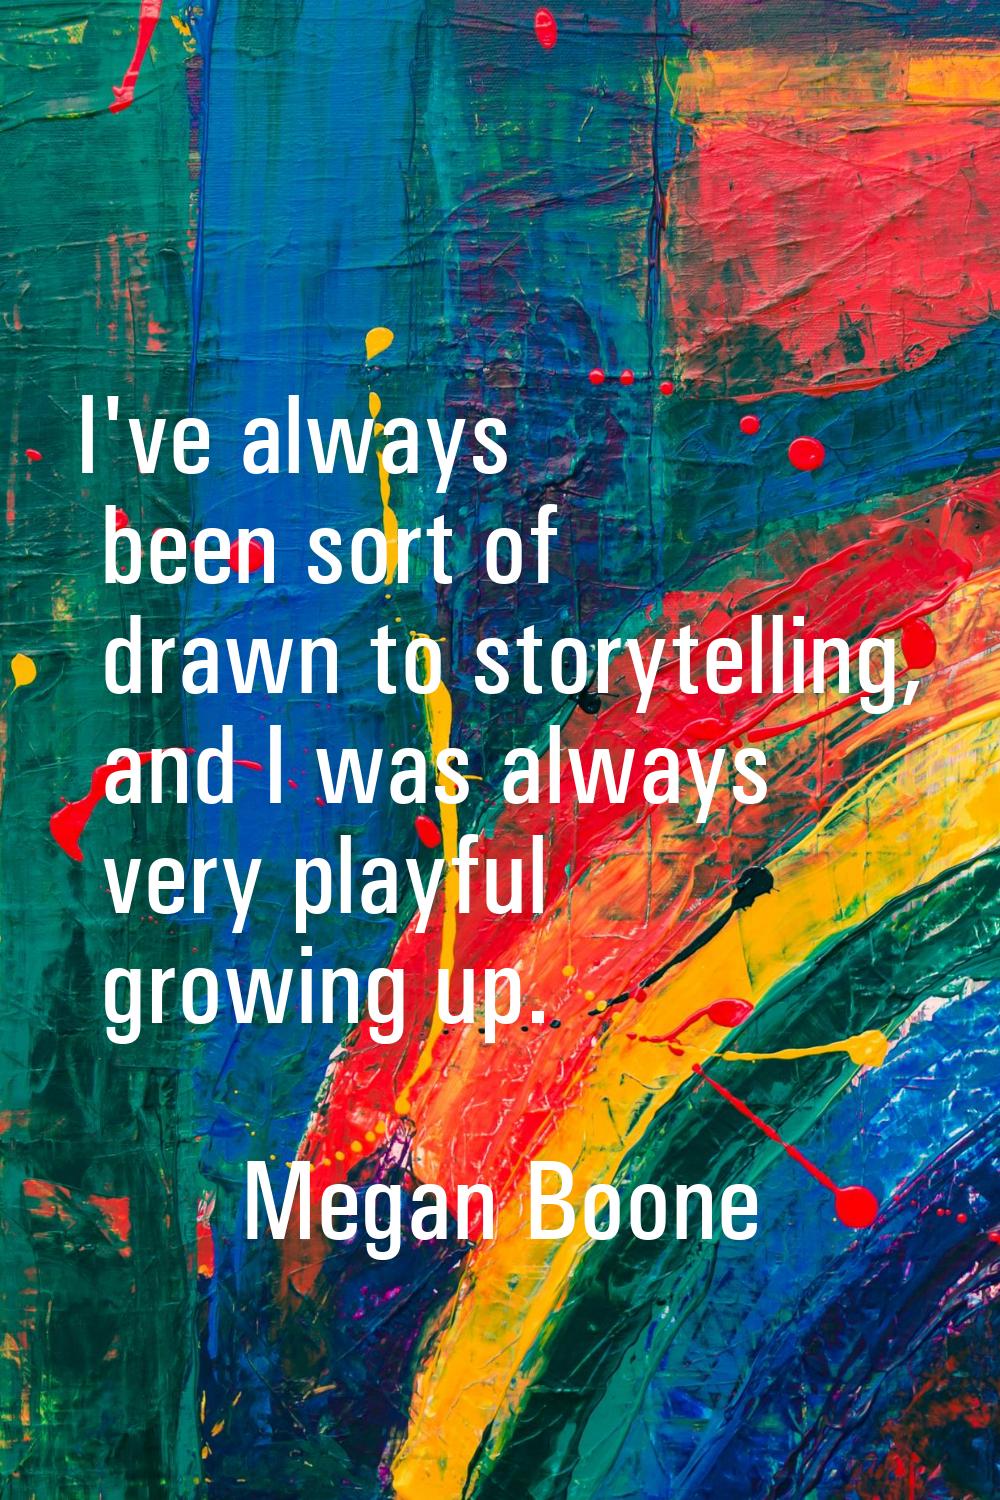 I've always been sort of drawn to storytelling, and I was always very playful growing up.